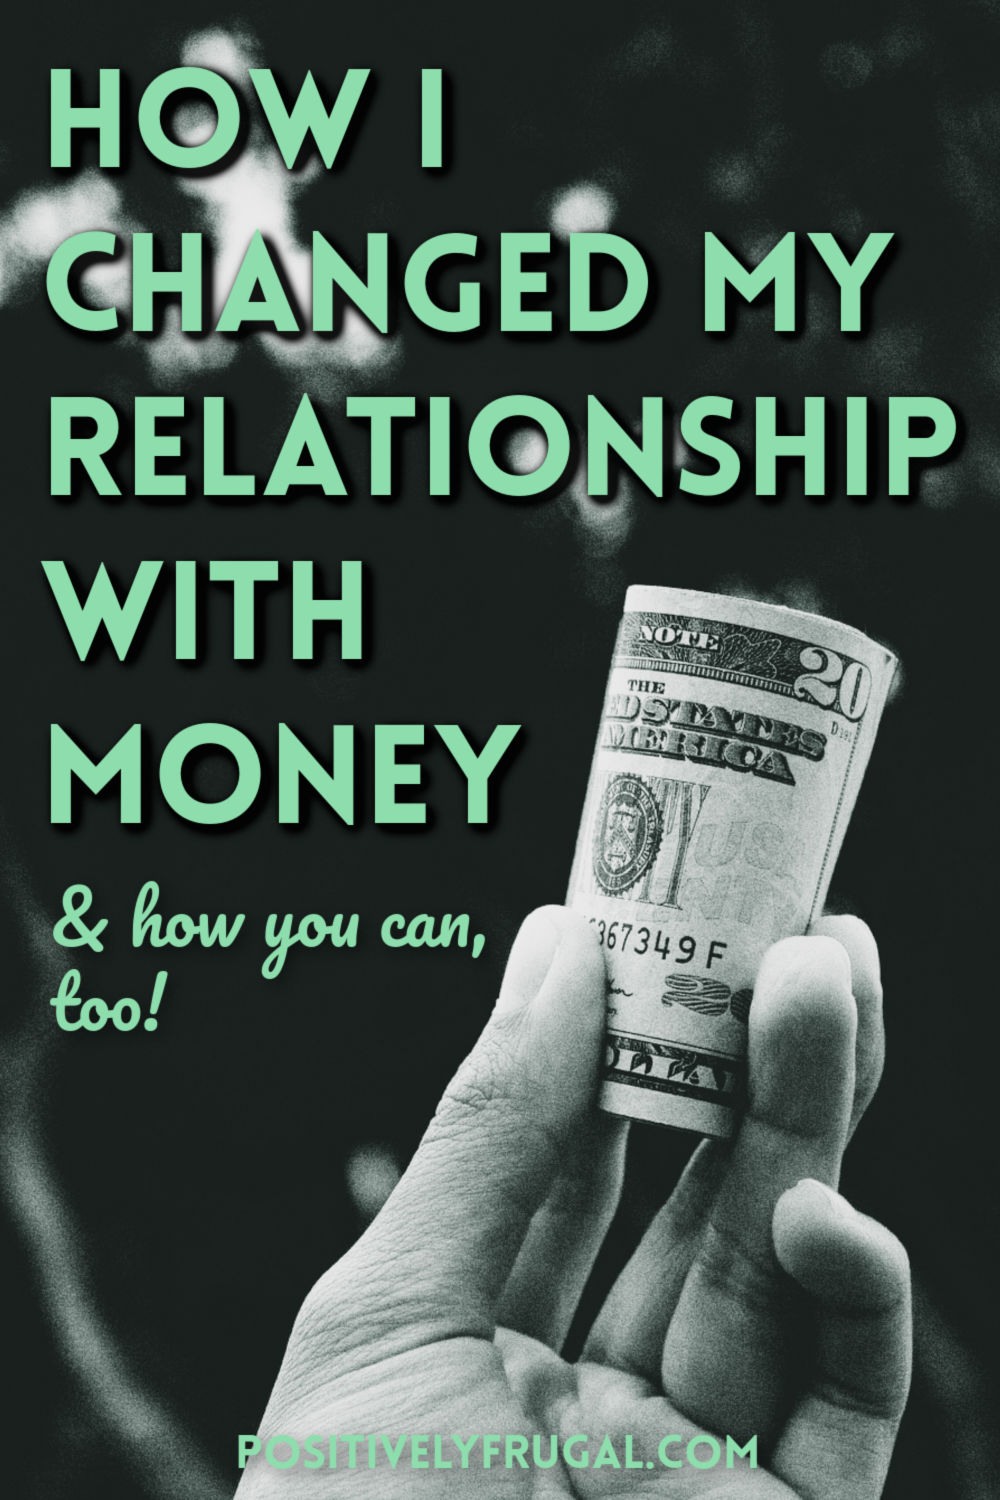 Your Relationship with Money by PositivelyFrugal.com